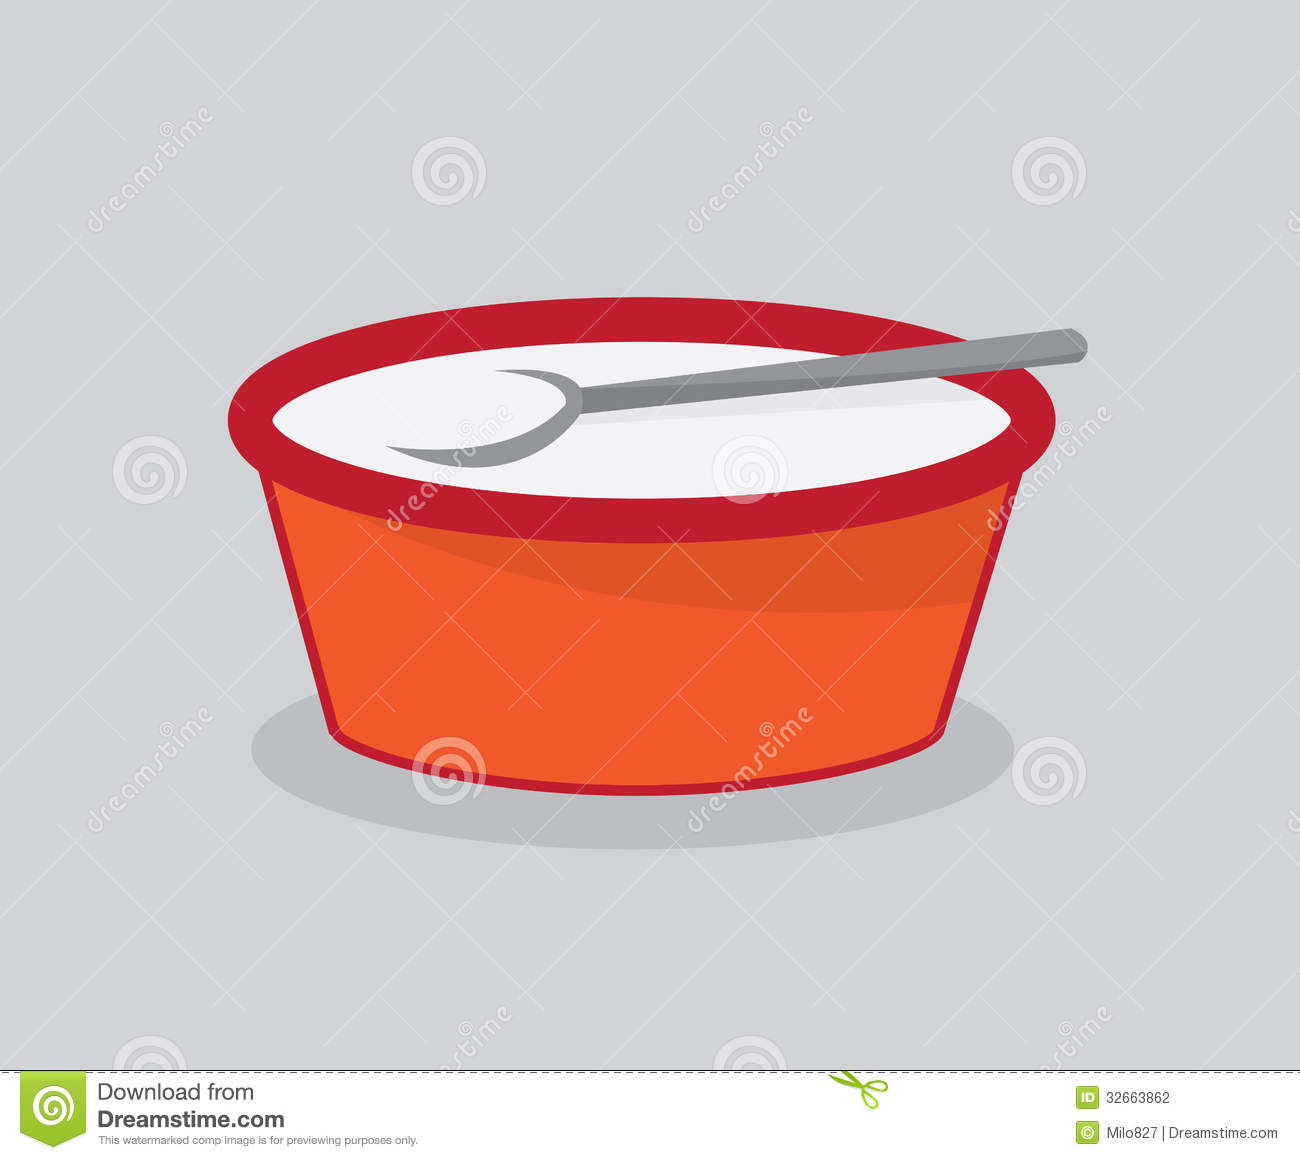 Bowl Of Milk With Spoon Stock Photography   Image  32663862